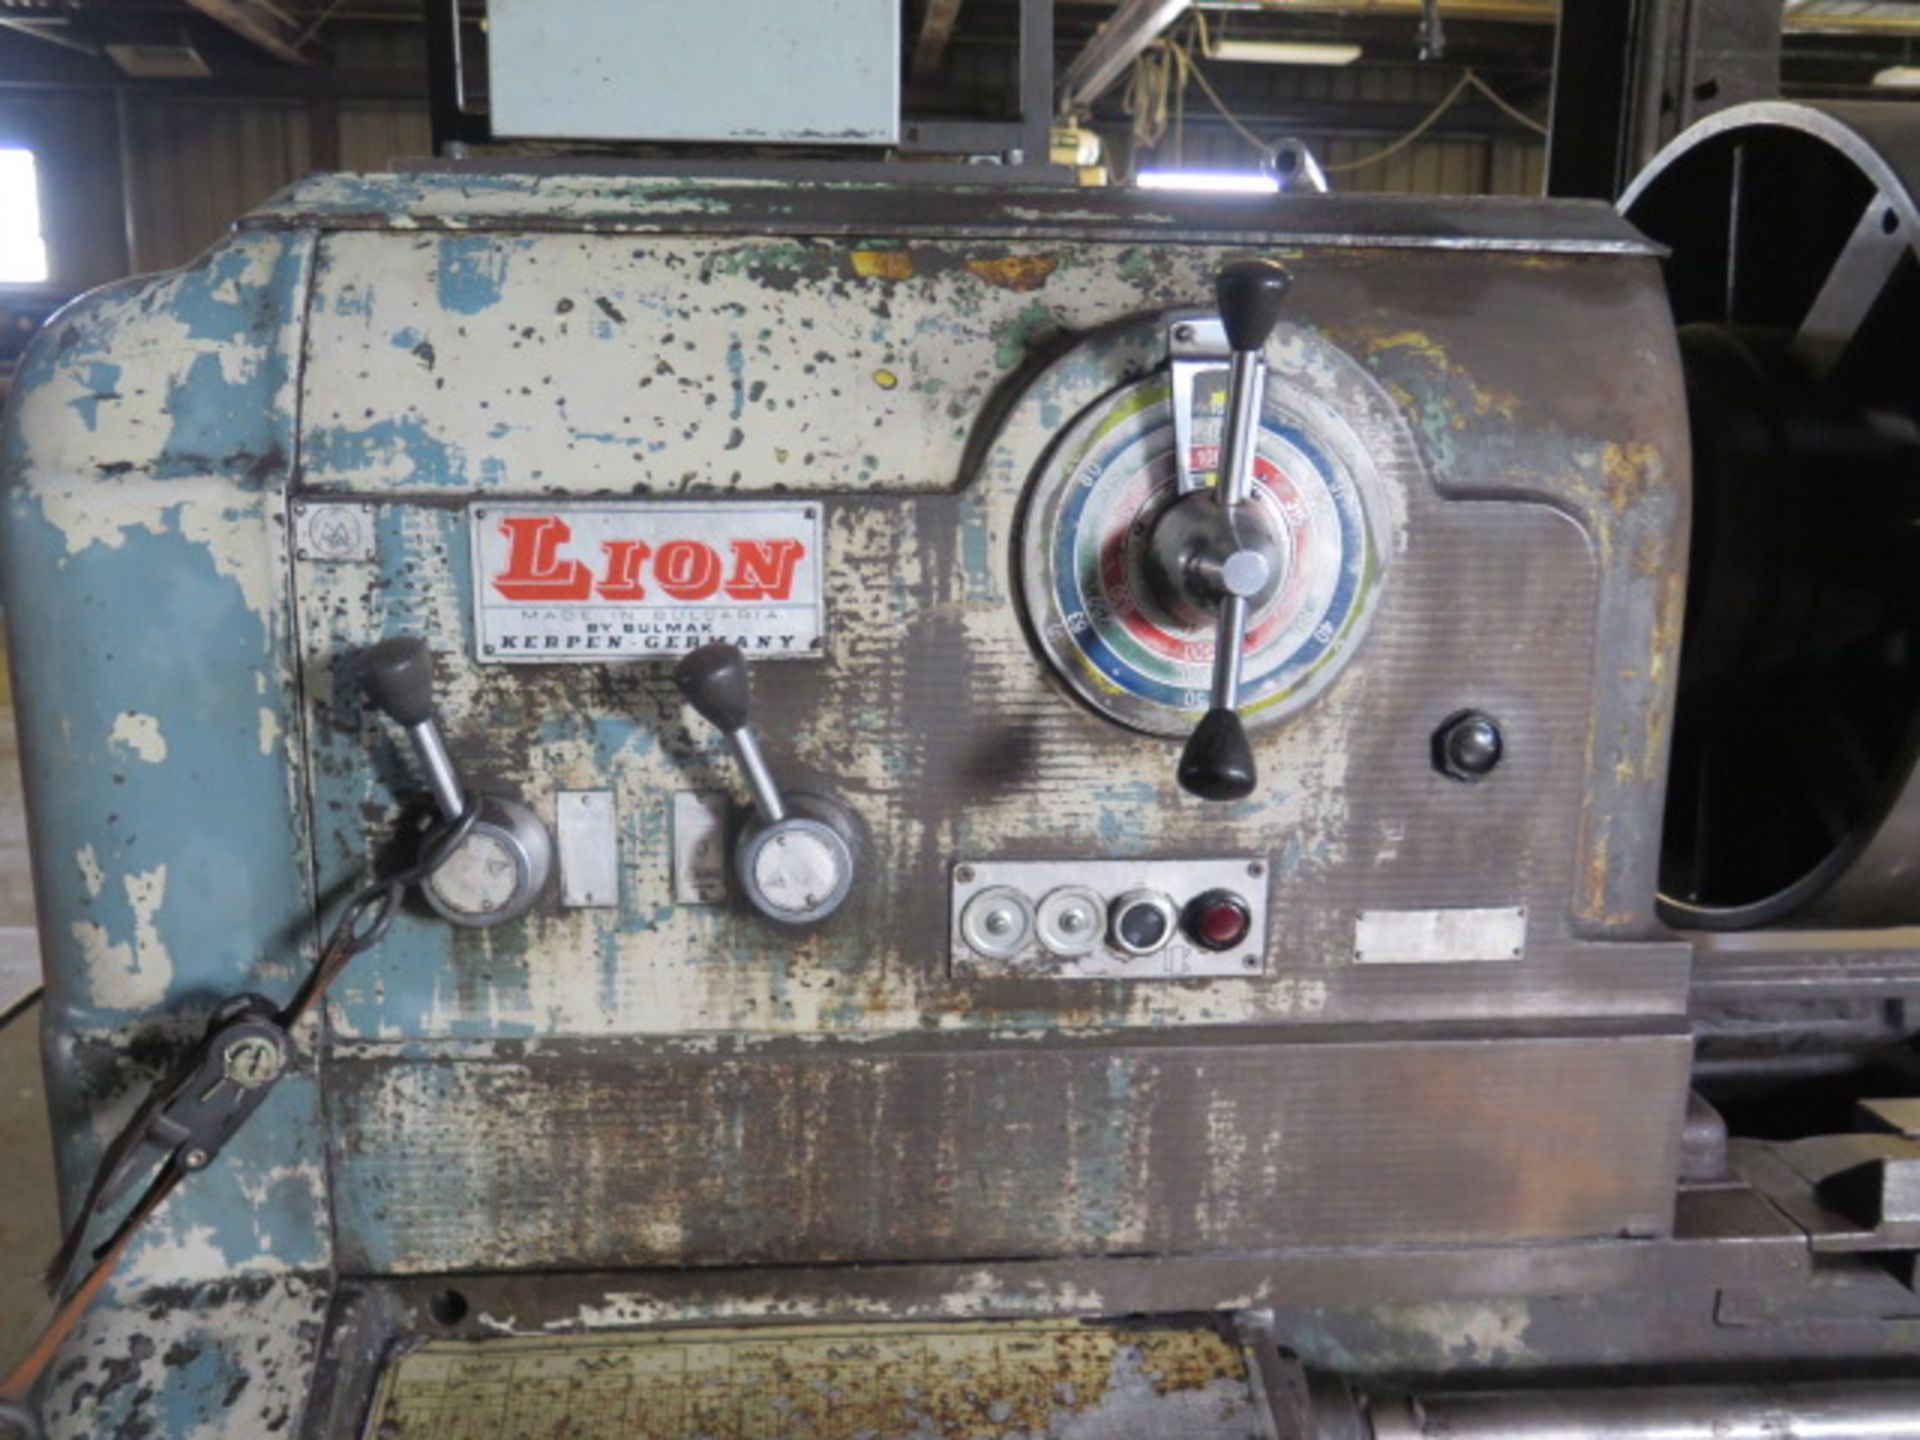 Lion C13/MB 32” x 230” Geared Head Lathe s/n C13MH-5000-80039 w/6-1000 RPM, Inch/mm Thrd, SOLD AS IS - Image 7 of 10